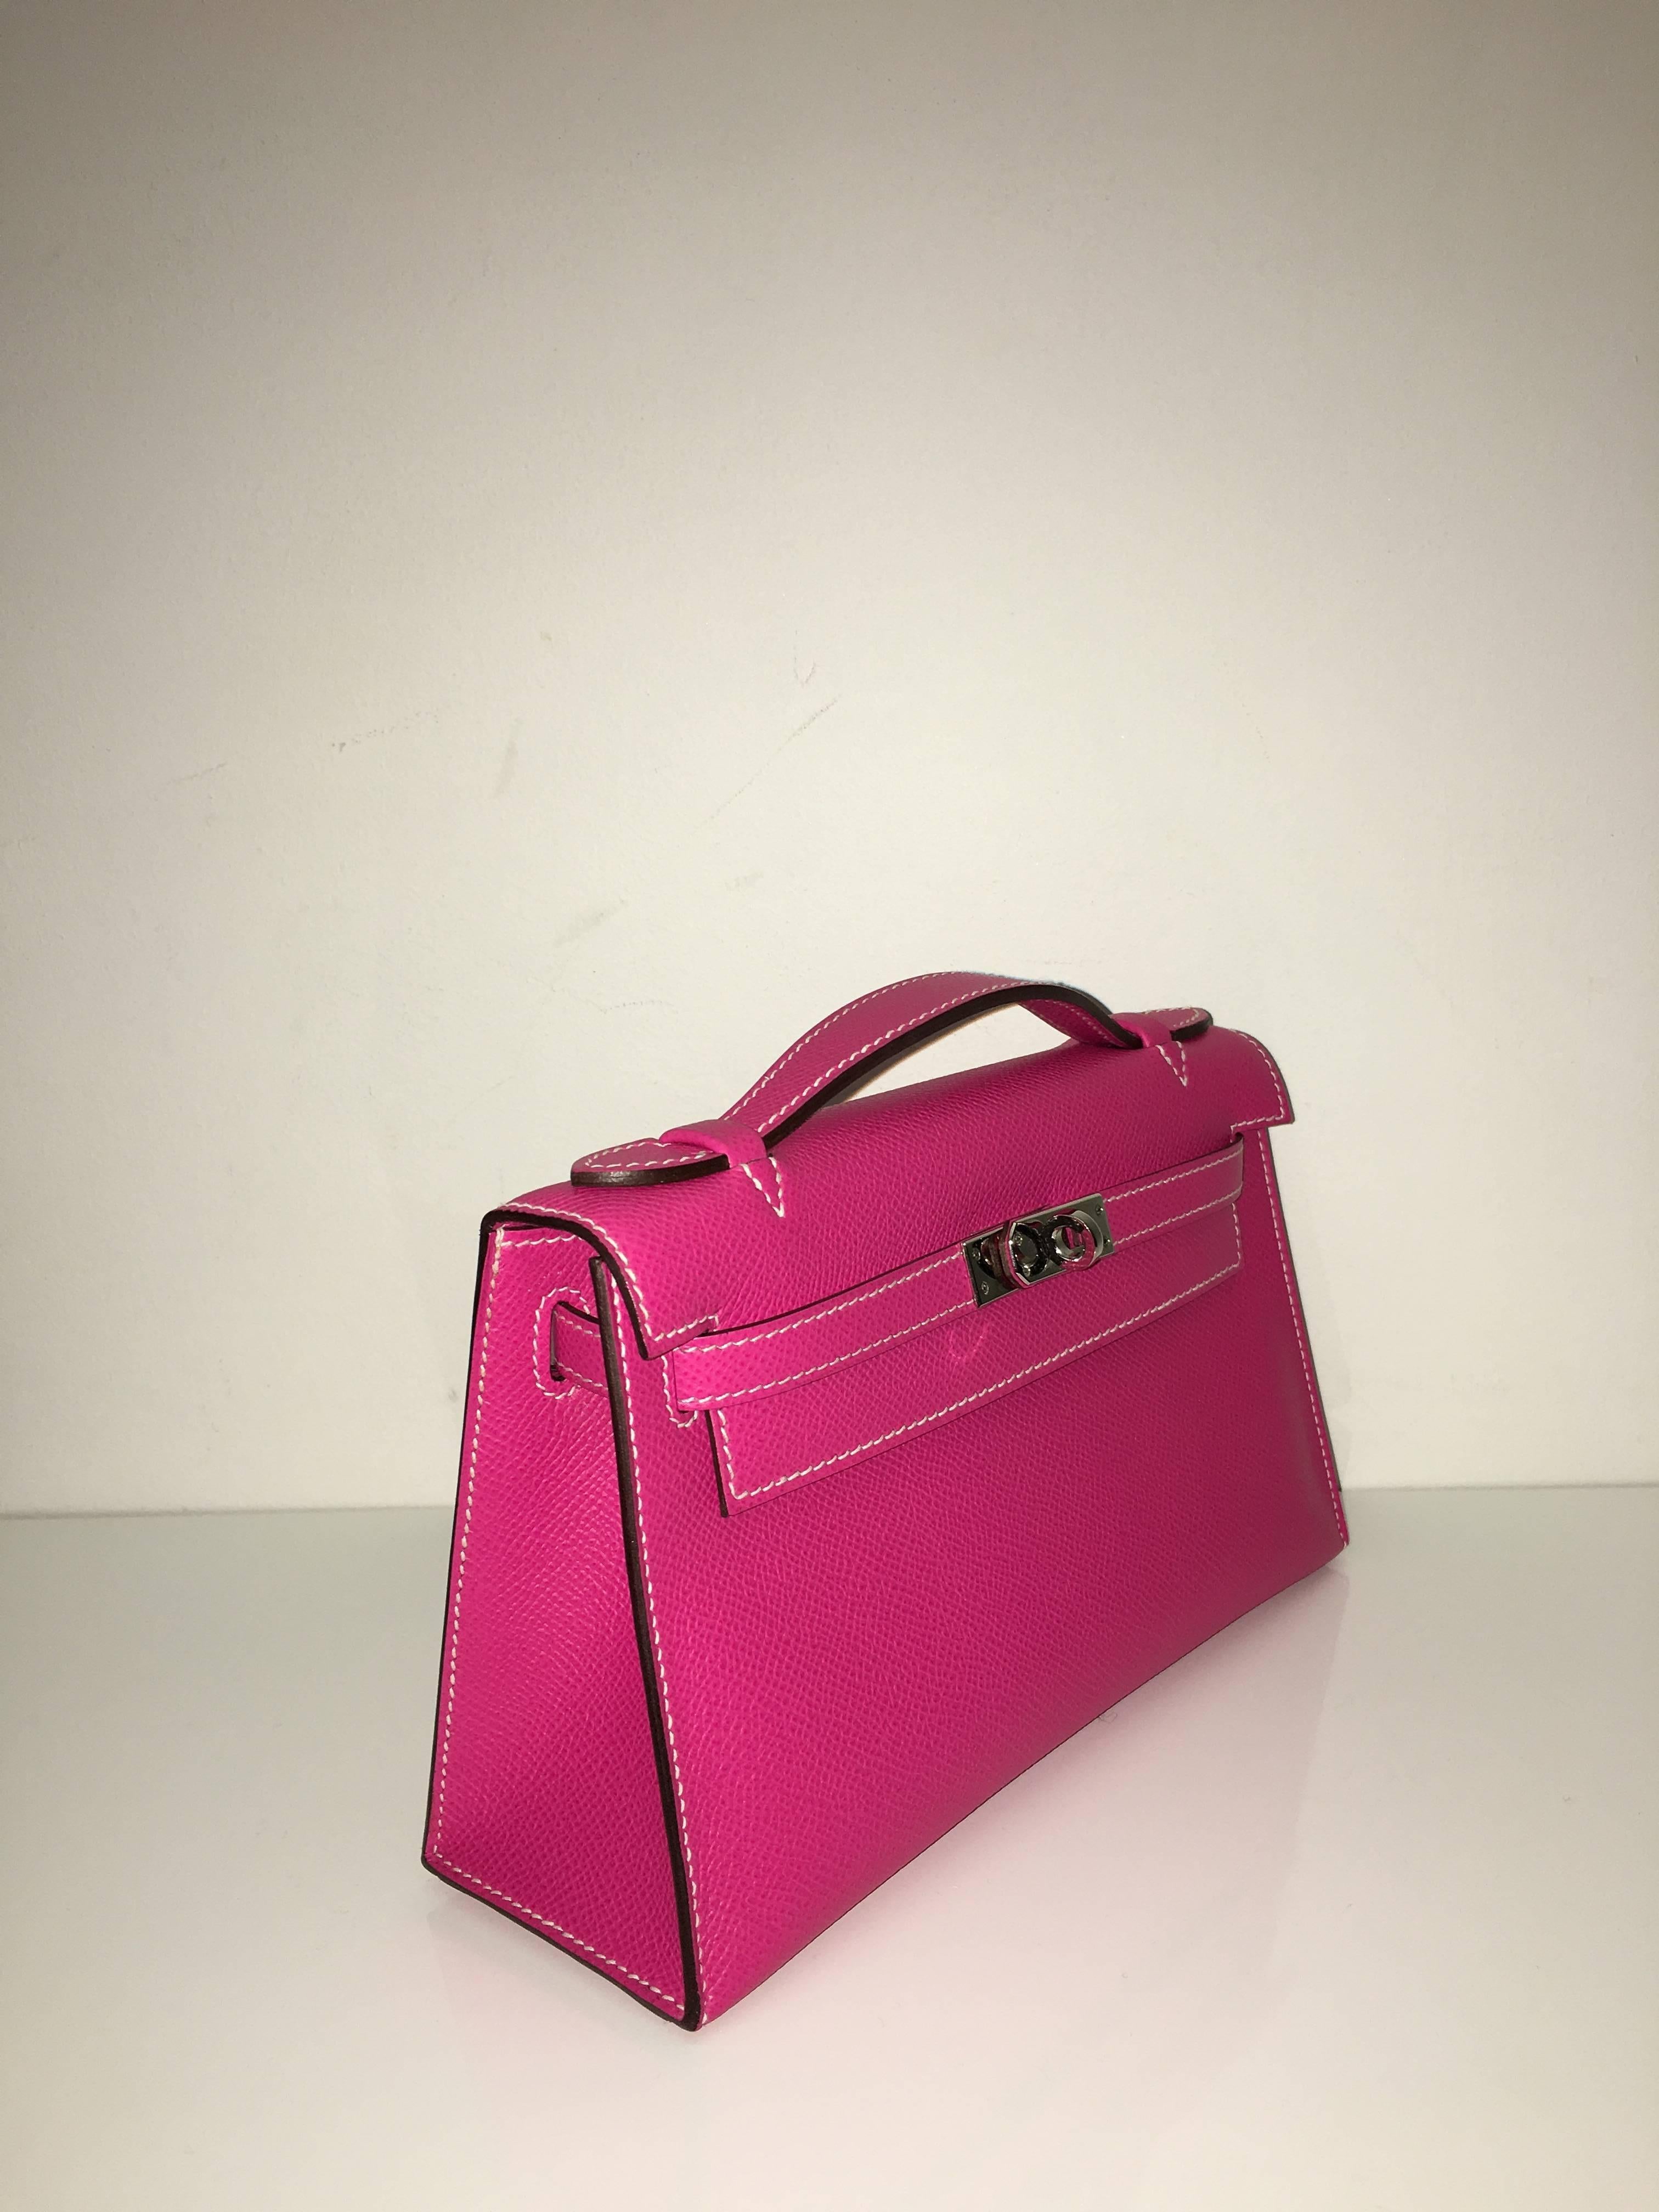 Hermes 
Kelly Pochette
Epsom Leather 
Colour Rose Tyrien
Palladium (Silver) Hardware 
store fresh, comes with receipt and full set (dust bag, box...) 
Hydeparkfashion specializes in sourcing and delivering authentic luxury handbags, mainly